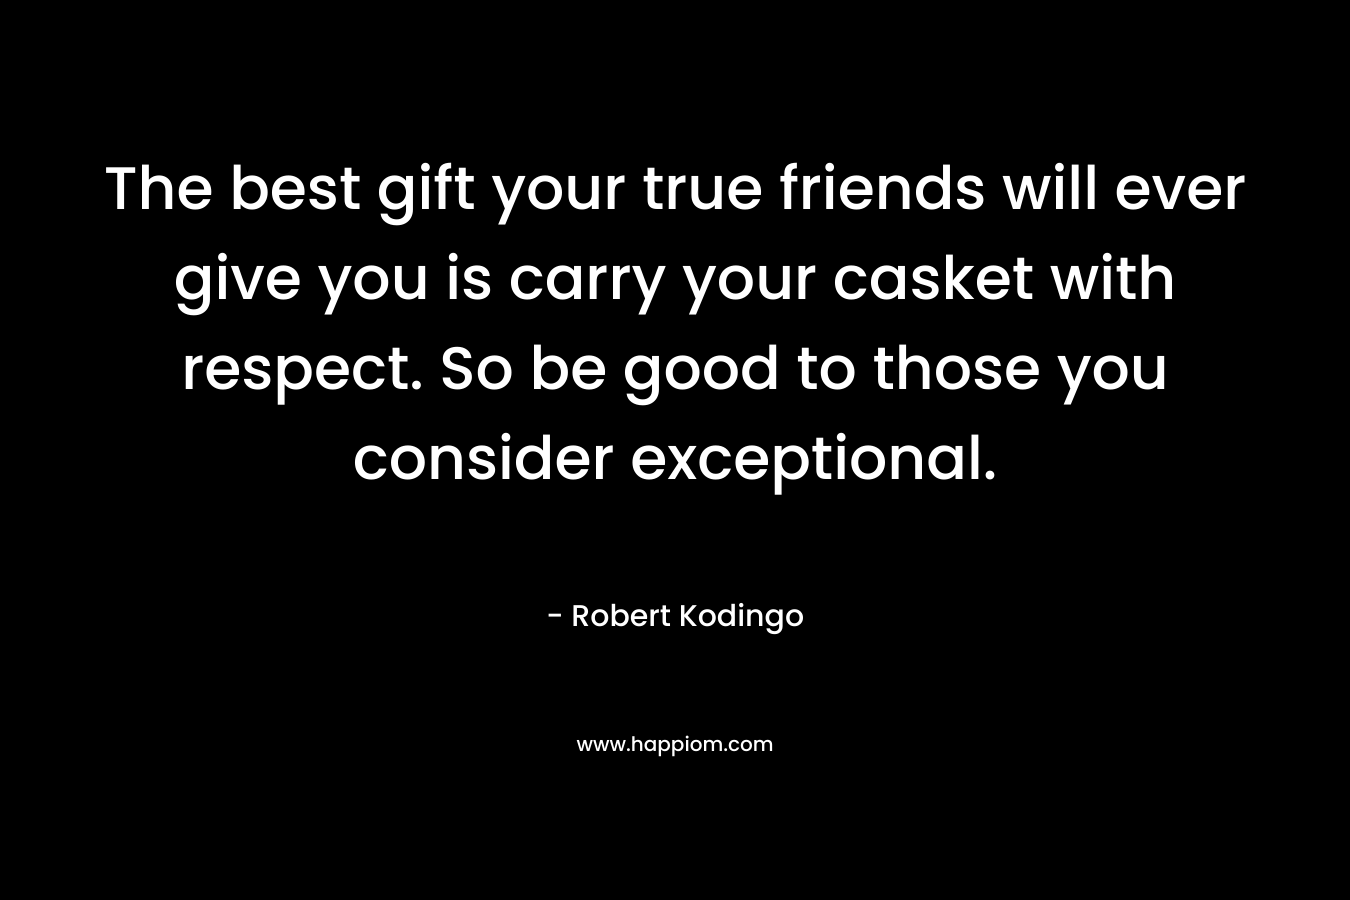 The best gift your true friends will ever give you is carry your casket with respect. So be good to those you consider exceptional. – Robert Kodingo